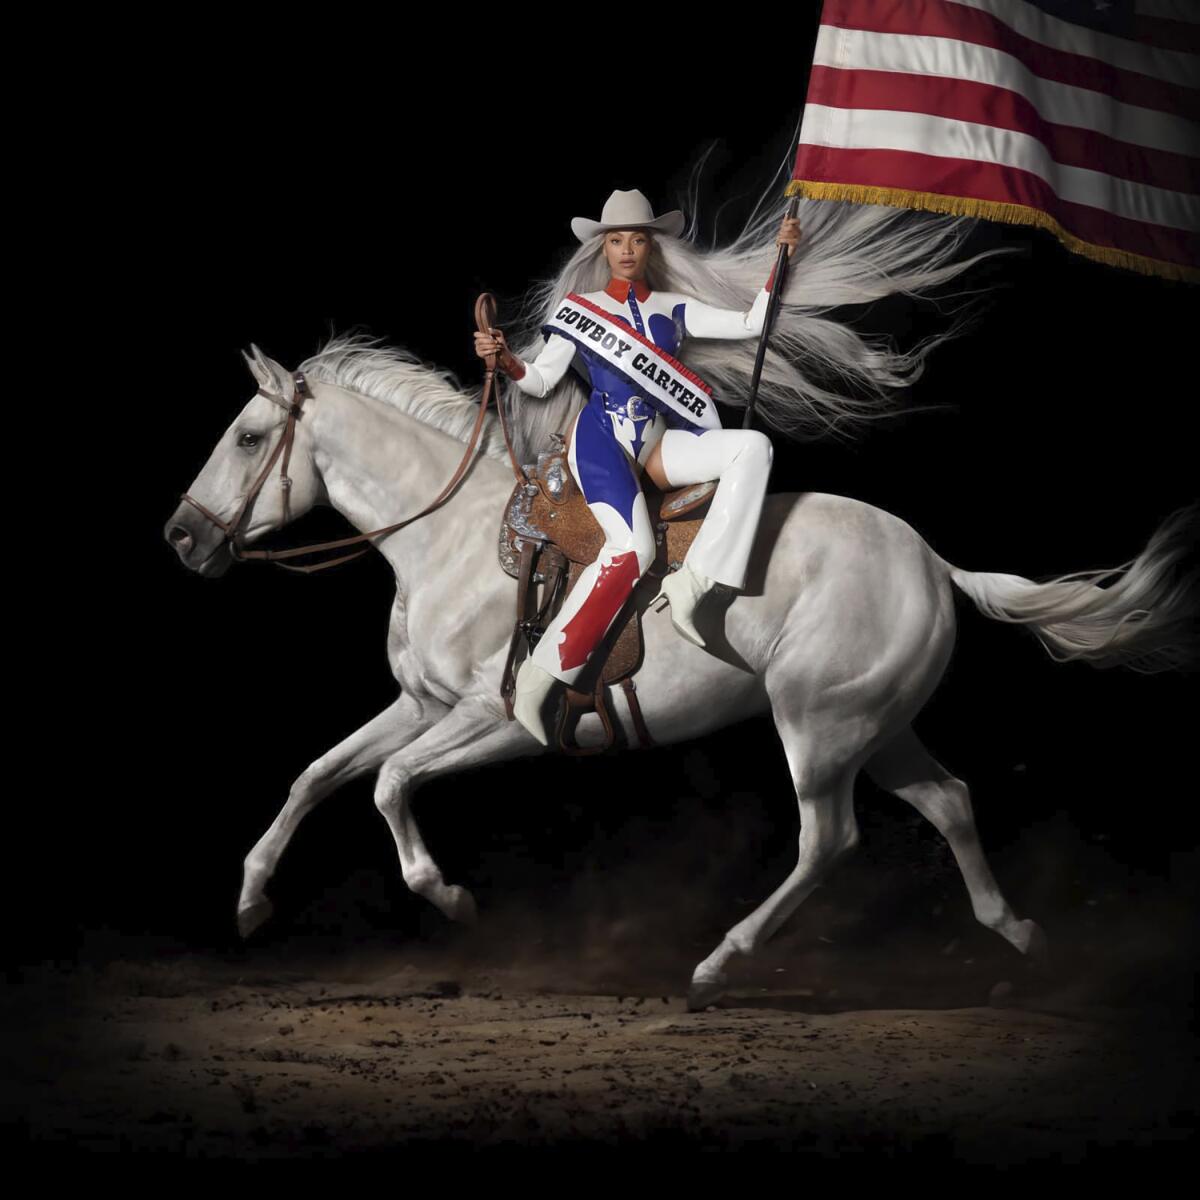 "Cowboy Carter" album art of Beyoncé in a red-white-and-blue rodeo outfit riding a horse and holding an American flag.